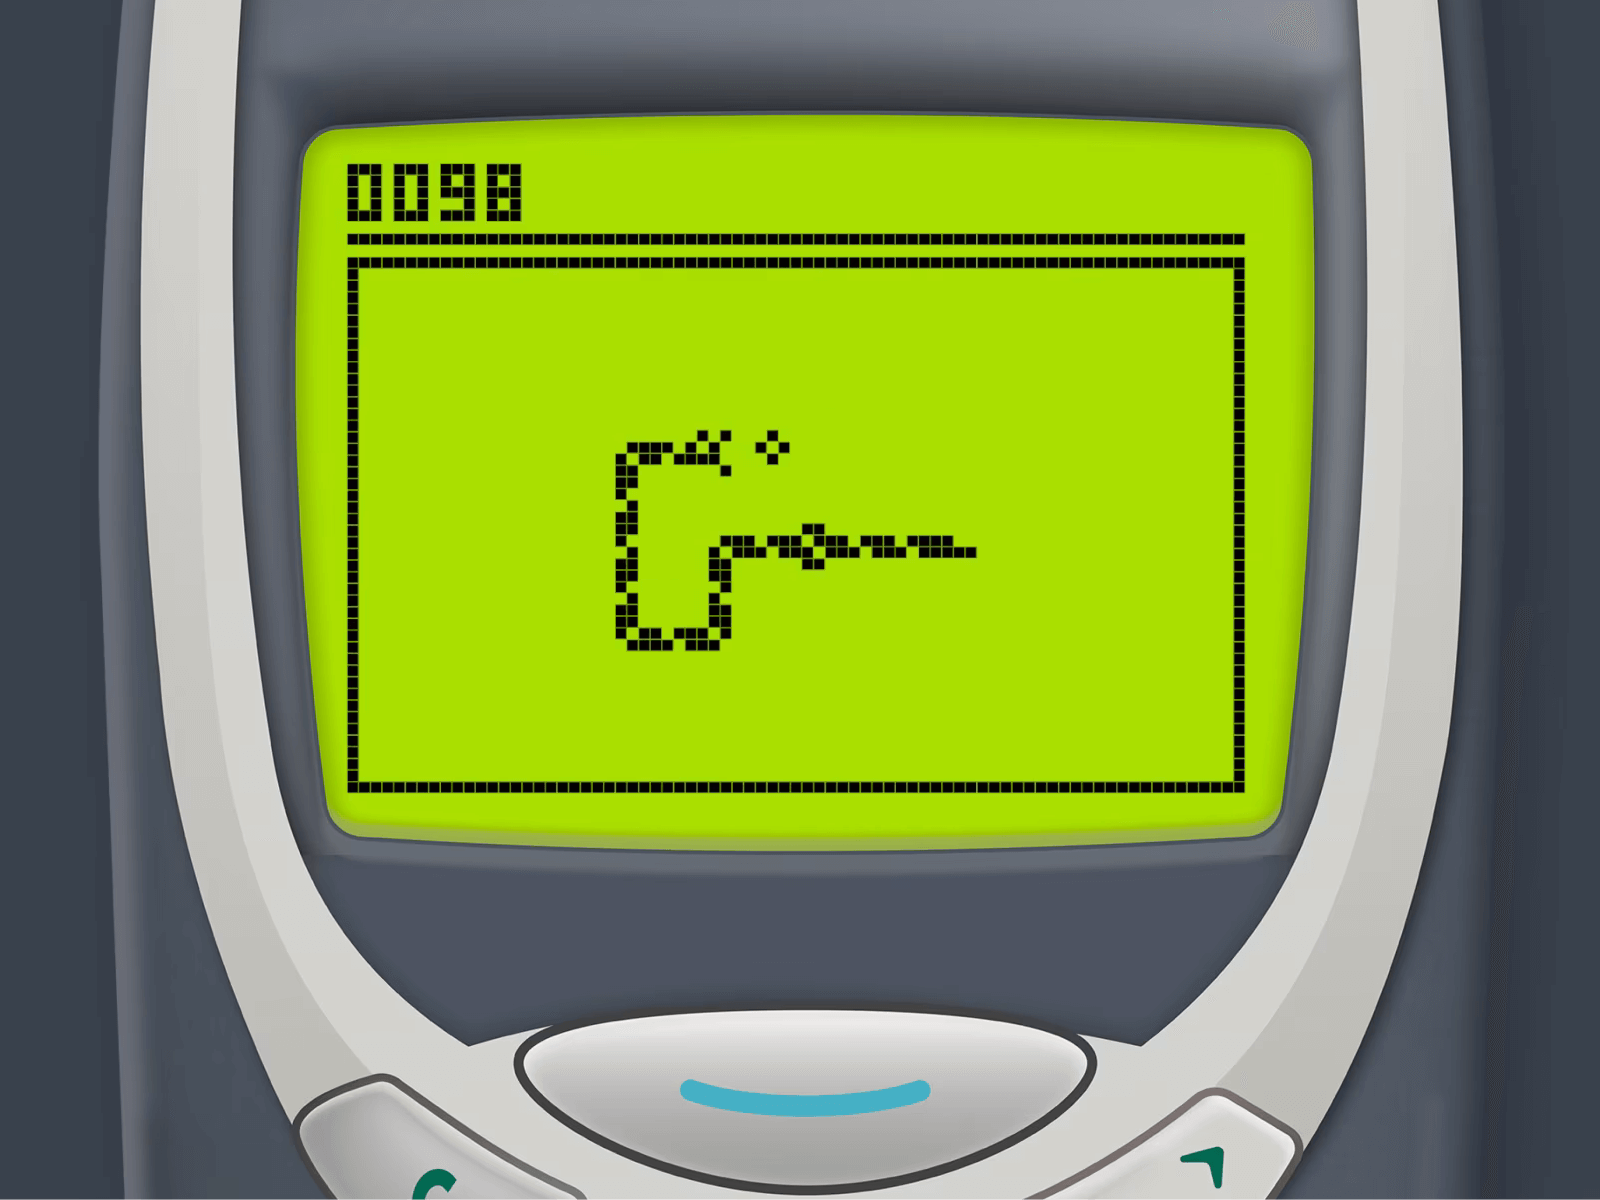 Snake as it was played on a Nokia phone.